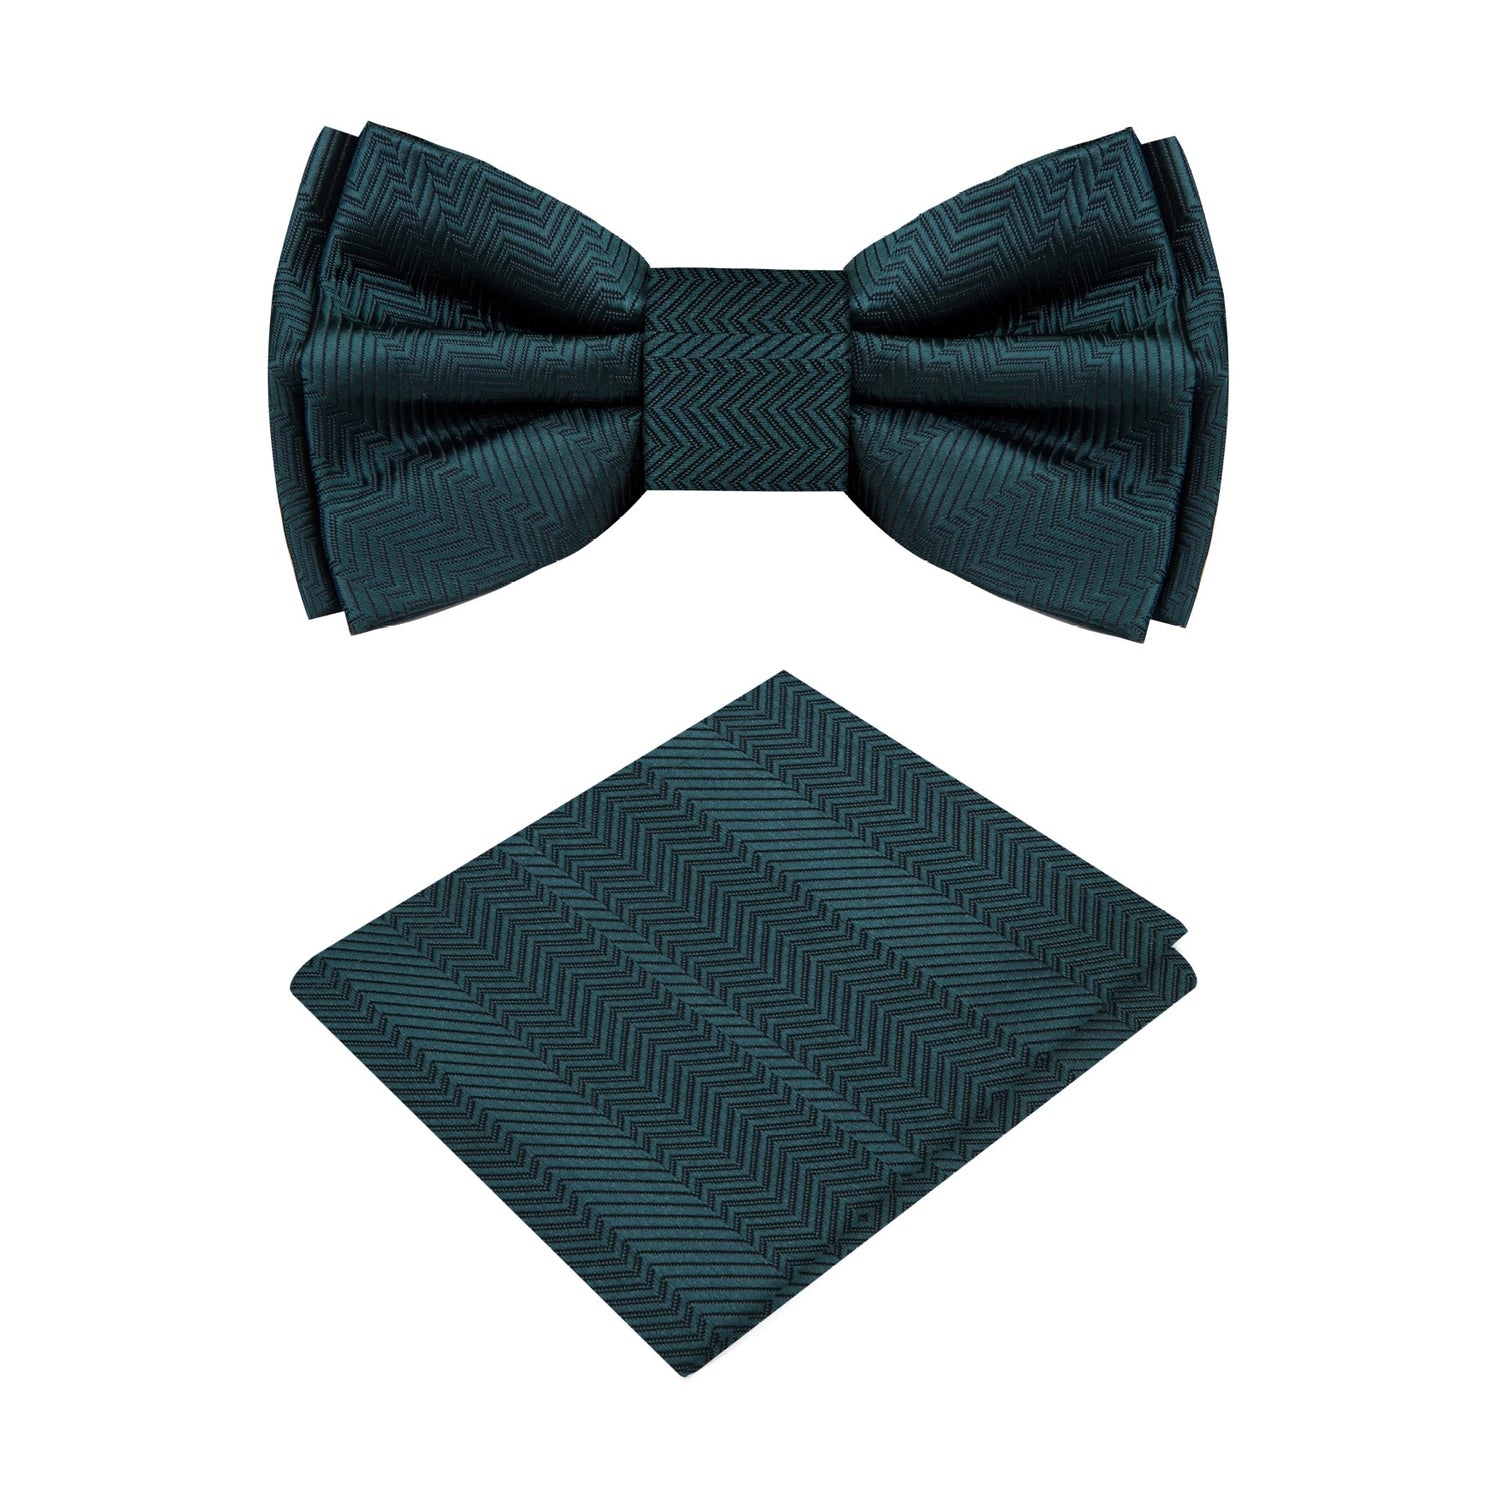 A Solid Deep Pine Green Pattern Silk Self Tie Bow Tie, Matching Pocket Square